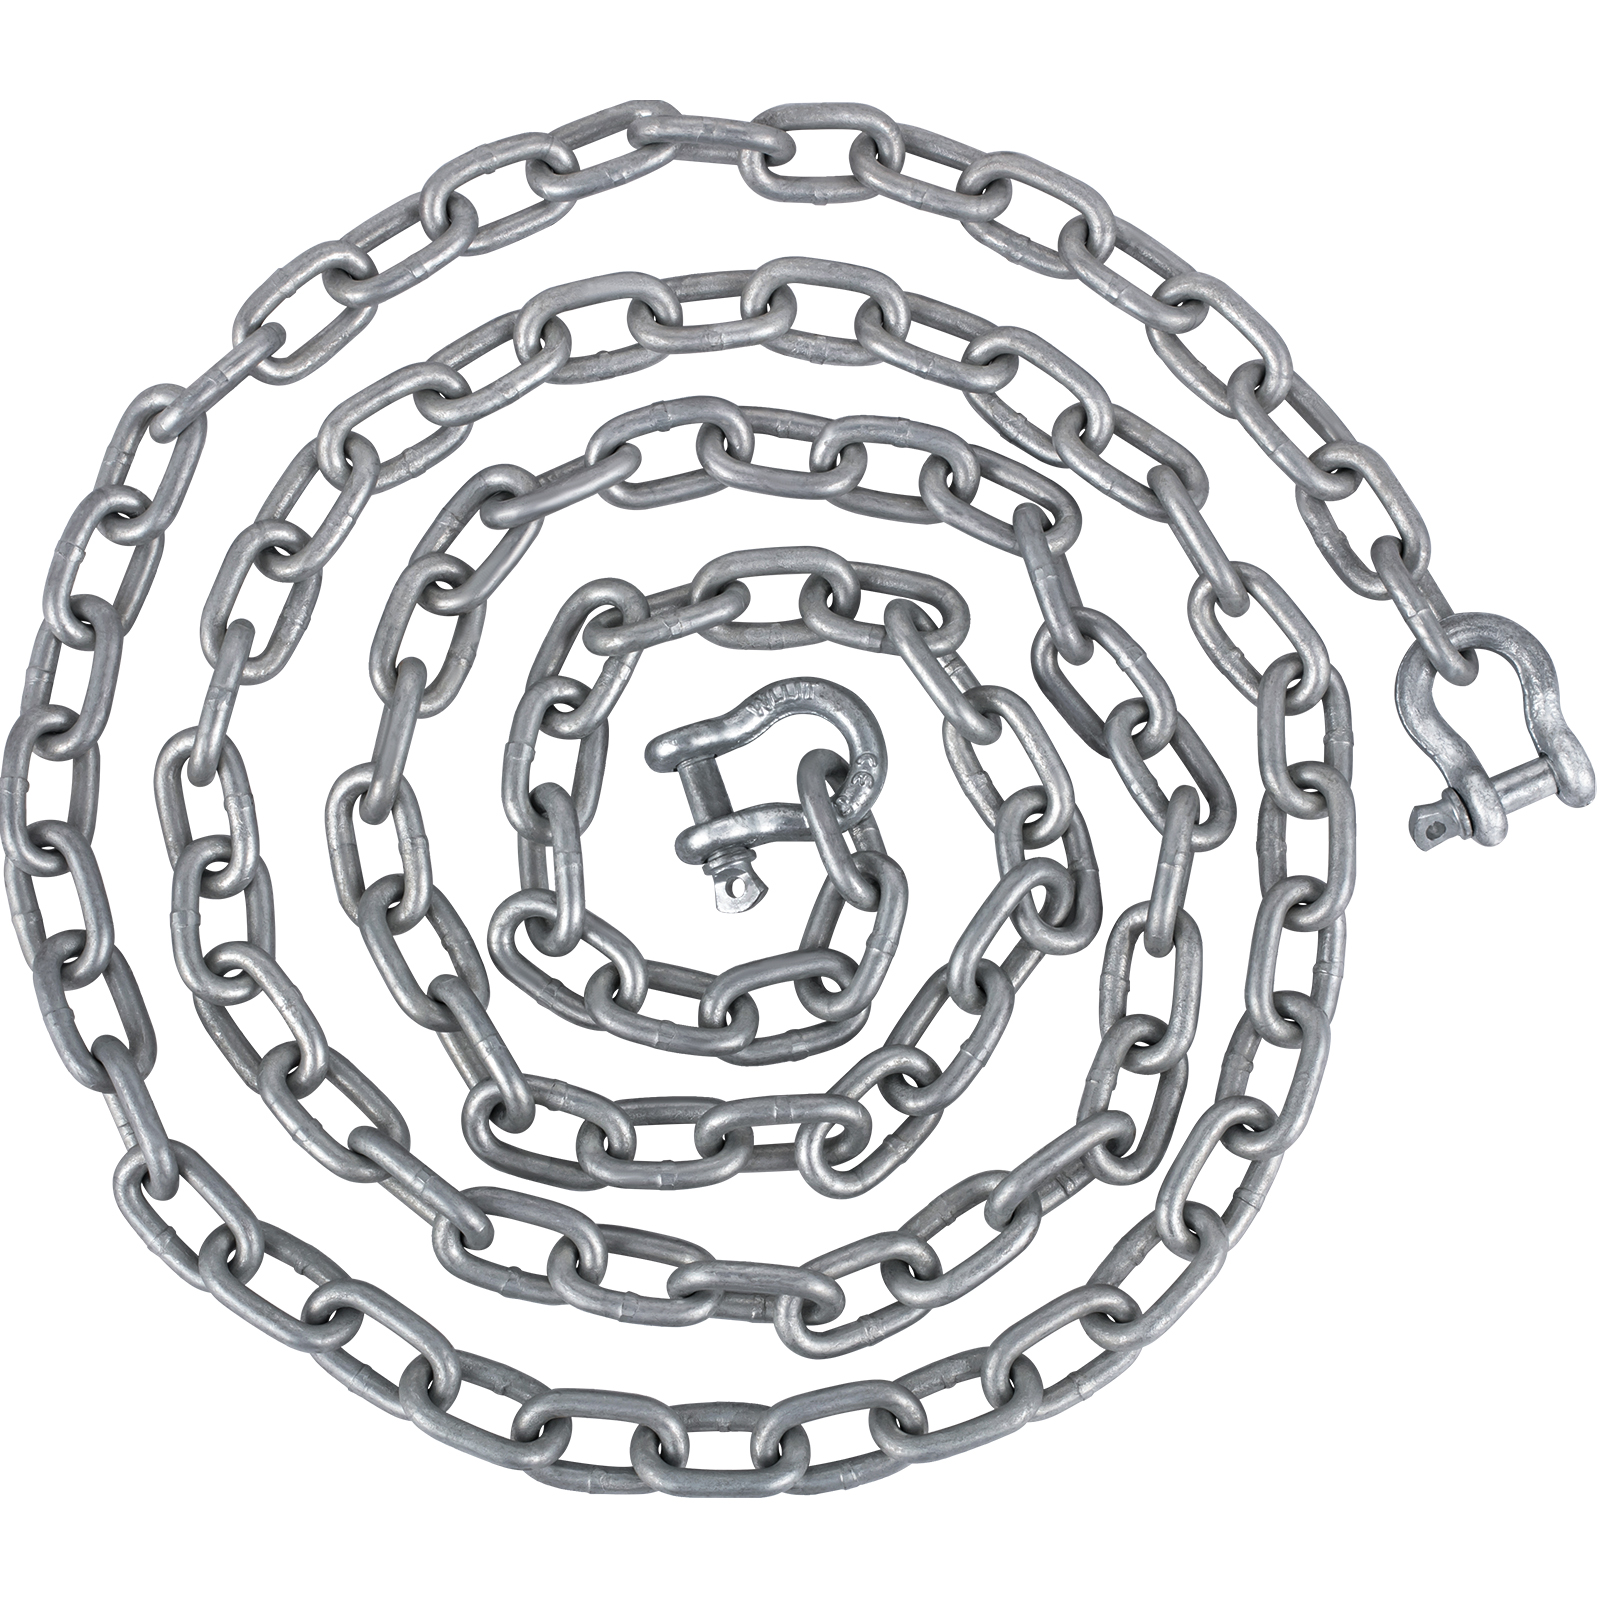 boat anchor chain,10ft,5/16in